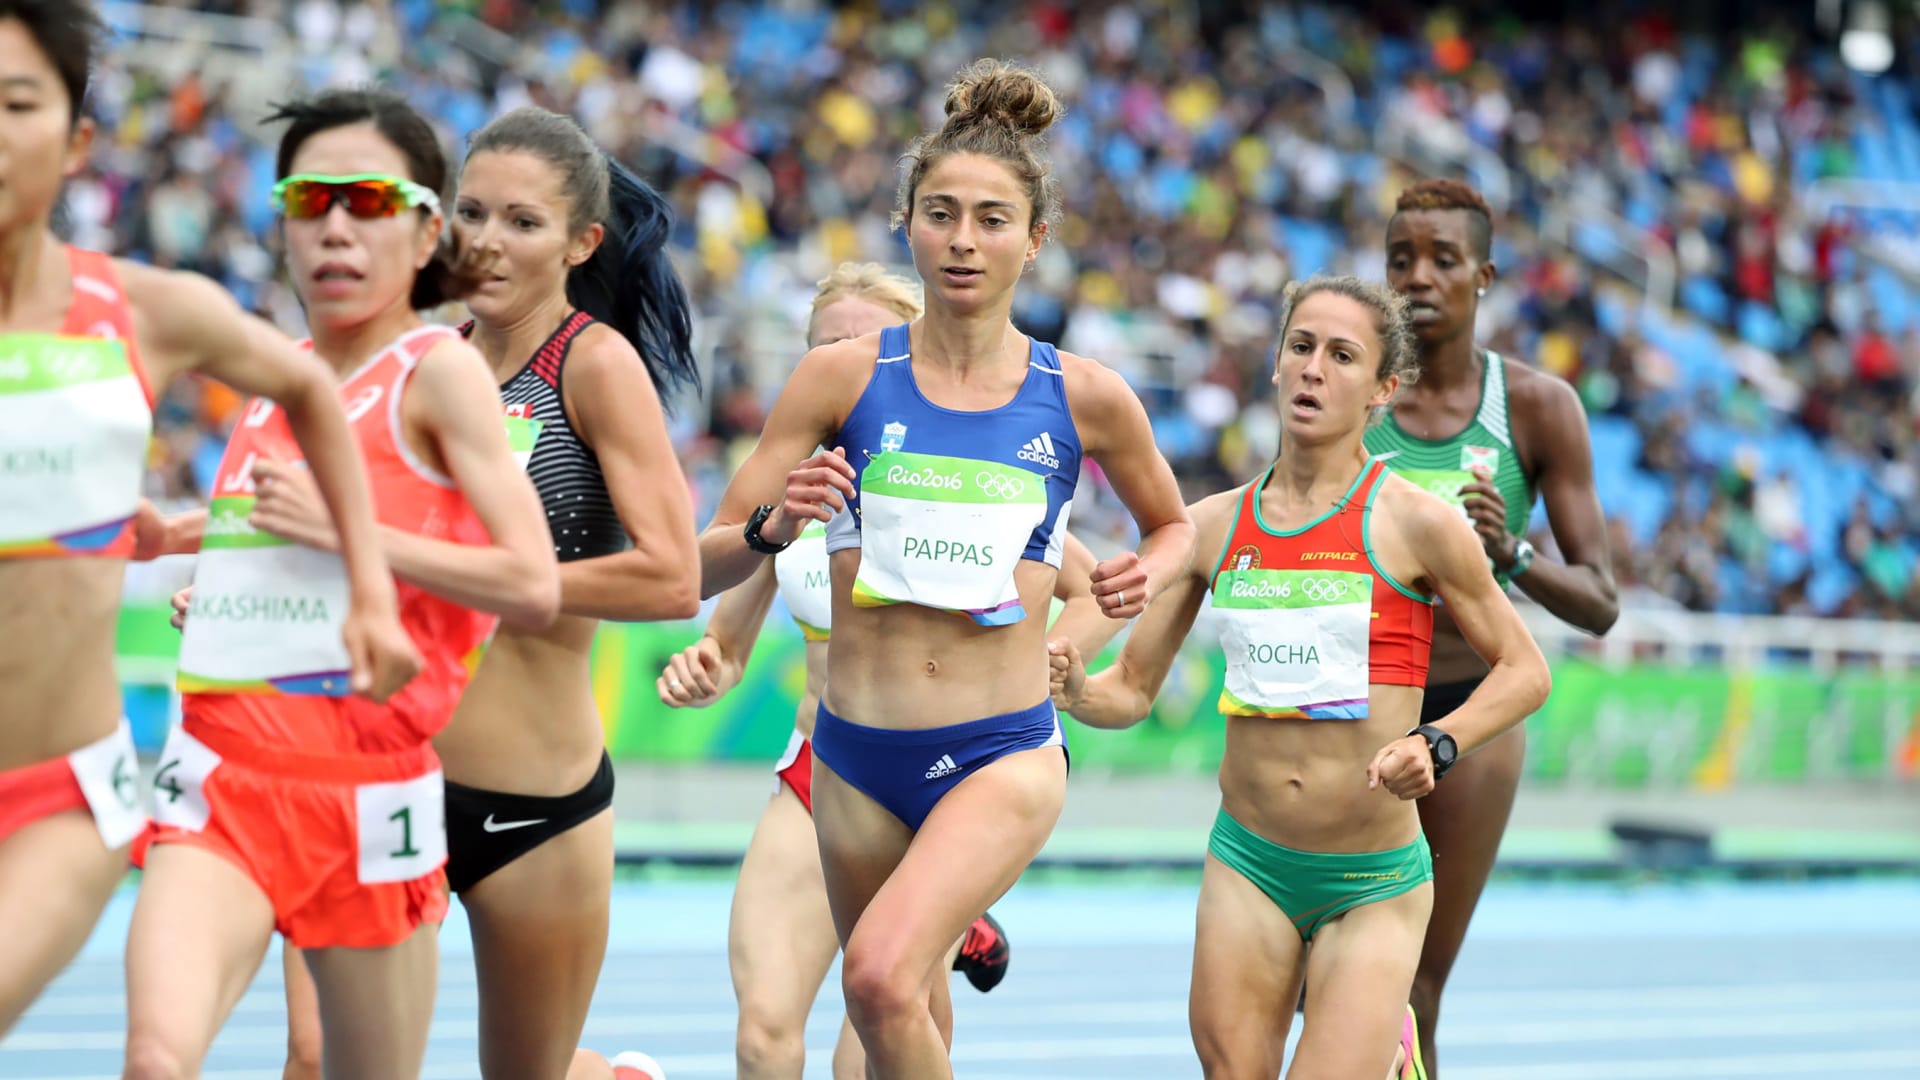 Alexi Pappas (in blue) during the Women's 10,000M Final at the 2016 Olympics in Rio.